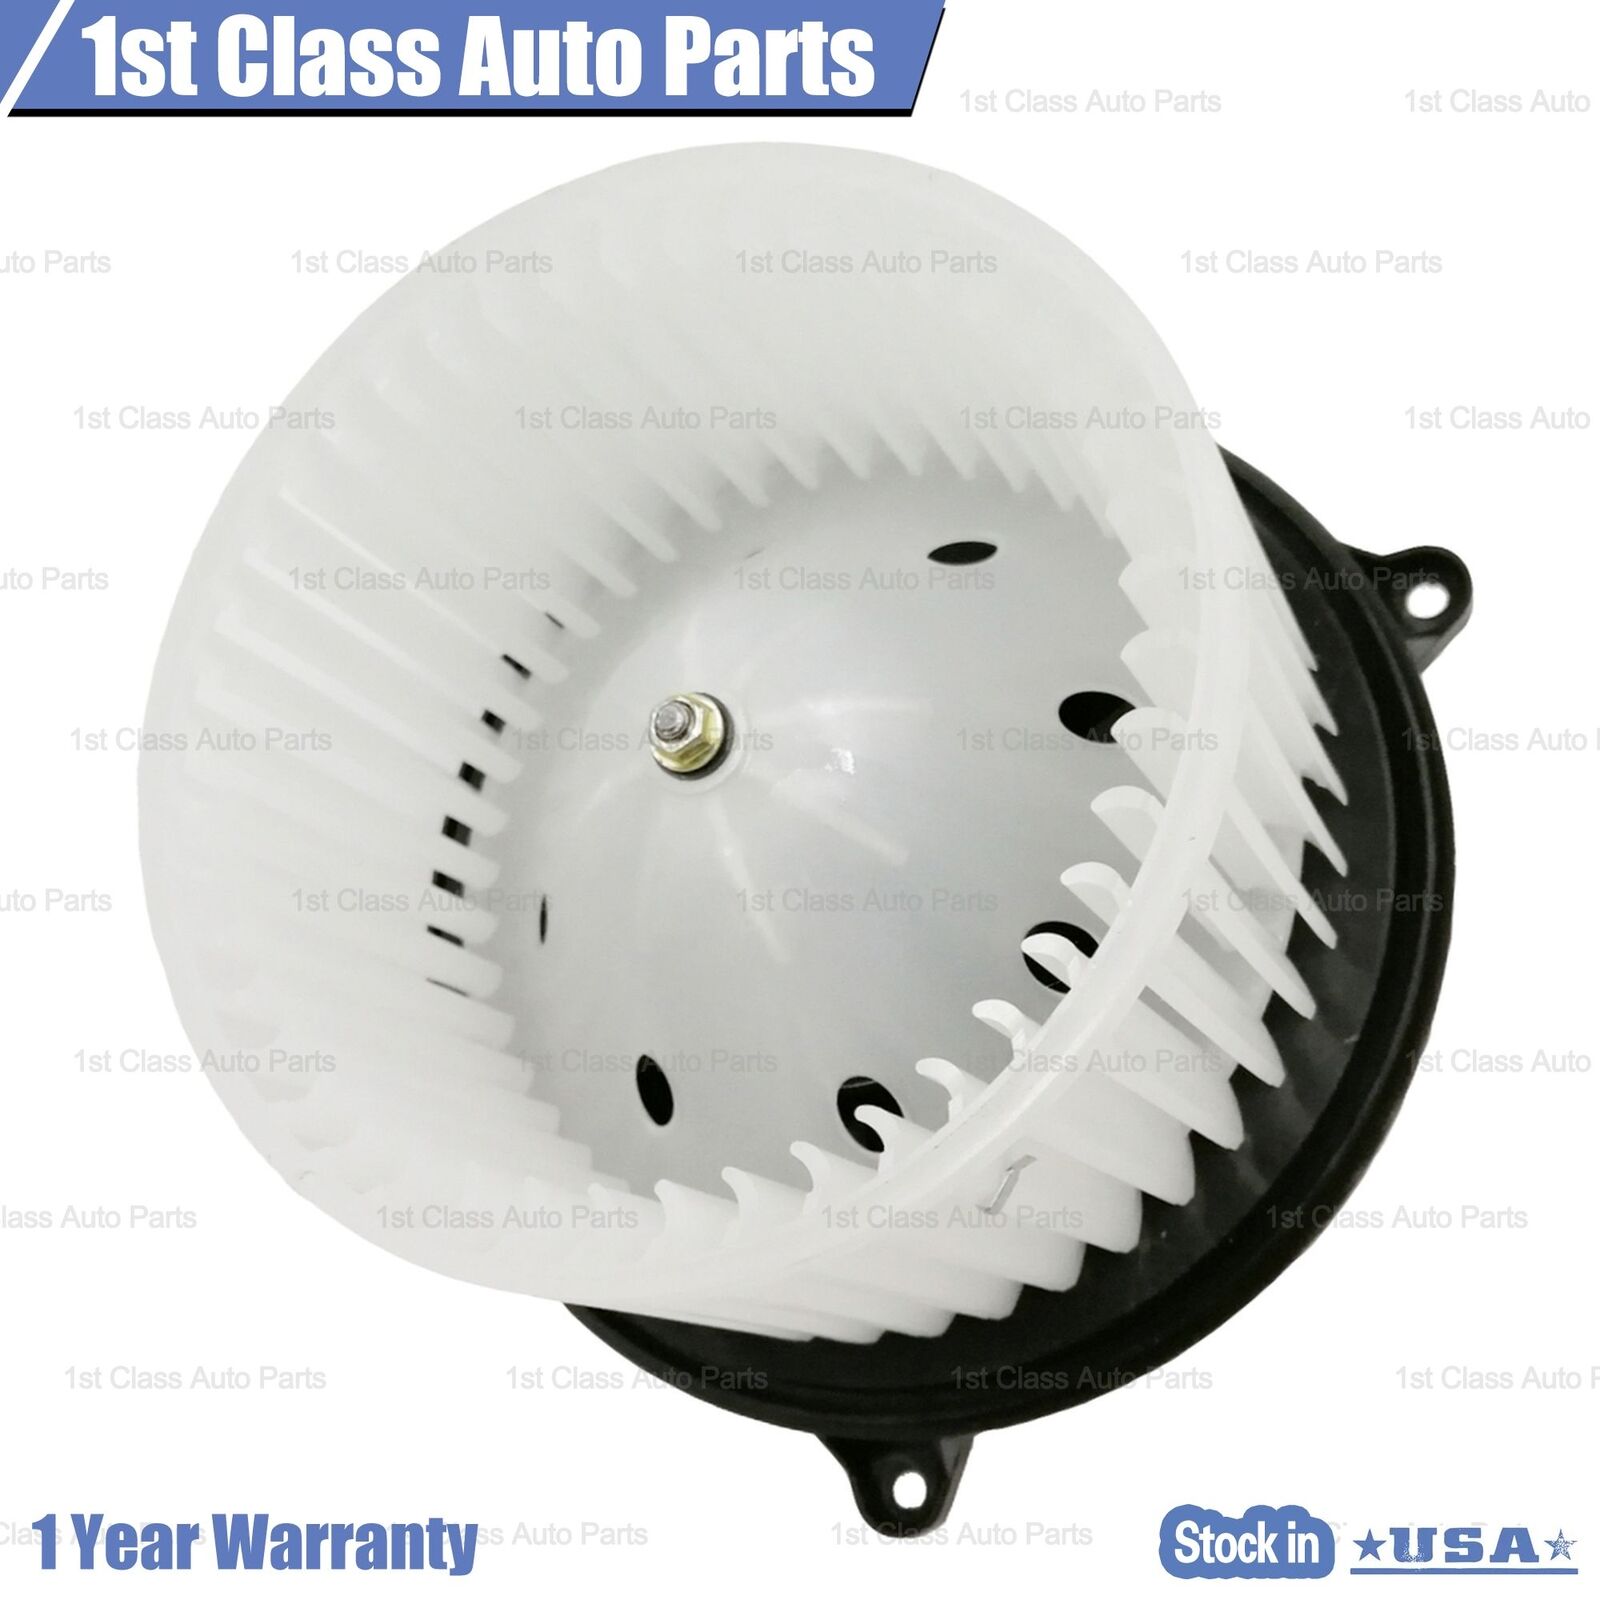 Heater Blower Motor w/fan Cage For Ford F150 Expedition Lincoln Navigator 700237